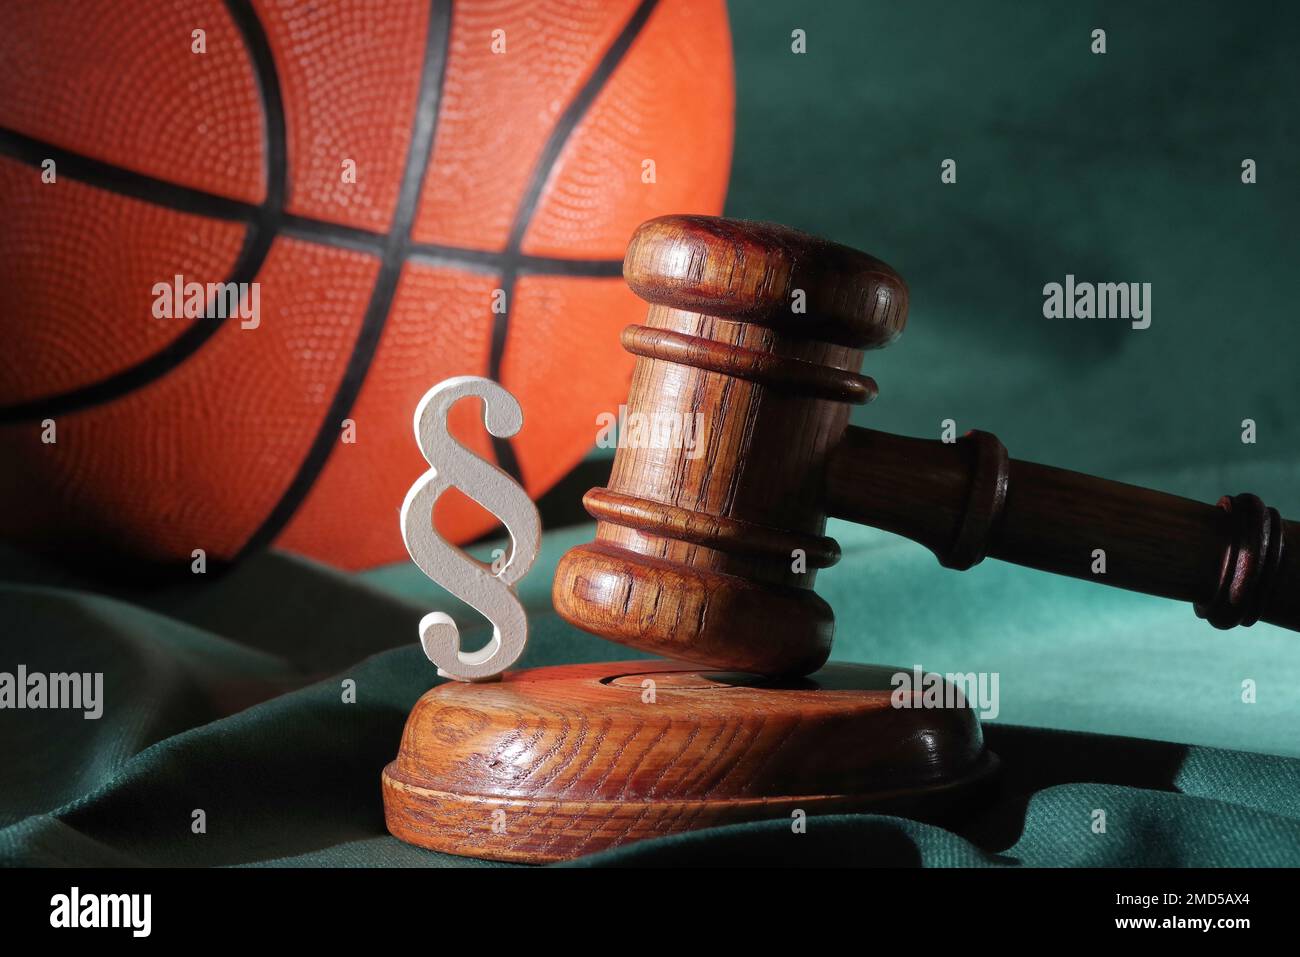 Sport and justice. Wooden judge gavel and basketball Stock Photo